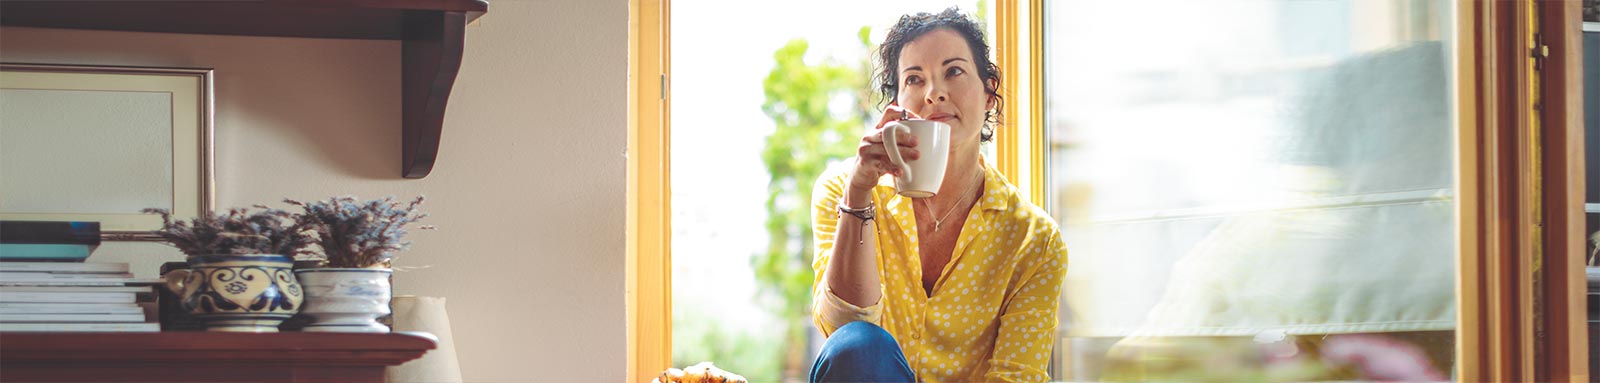 Woman thinking while drinking coffee by the window